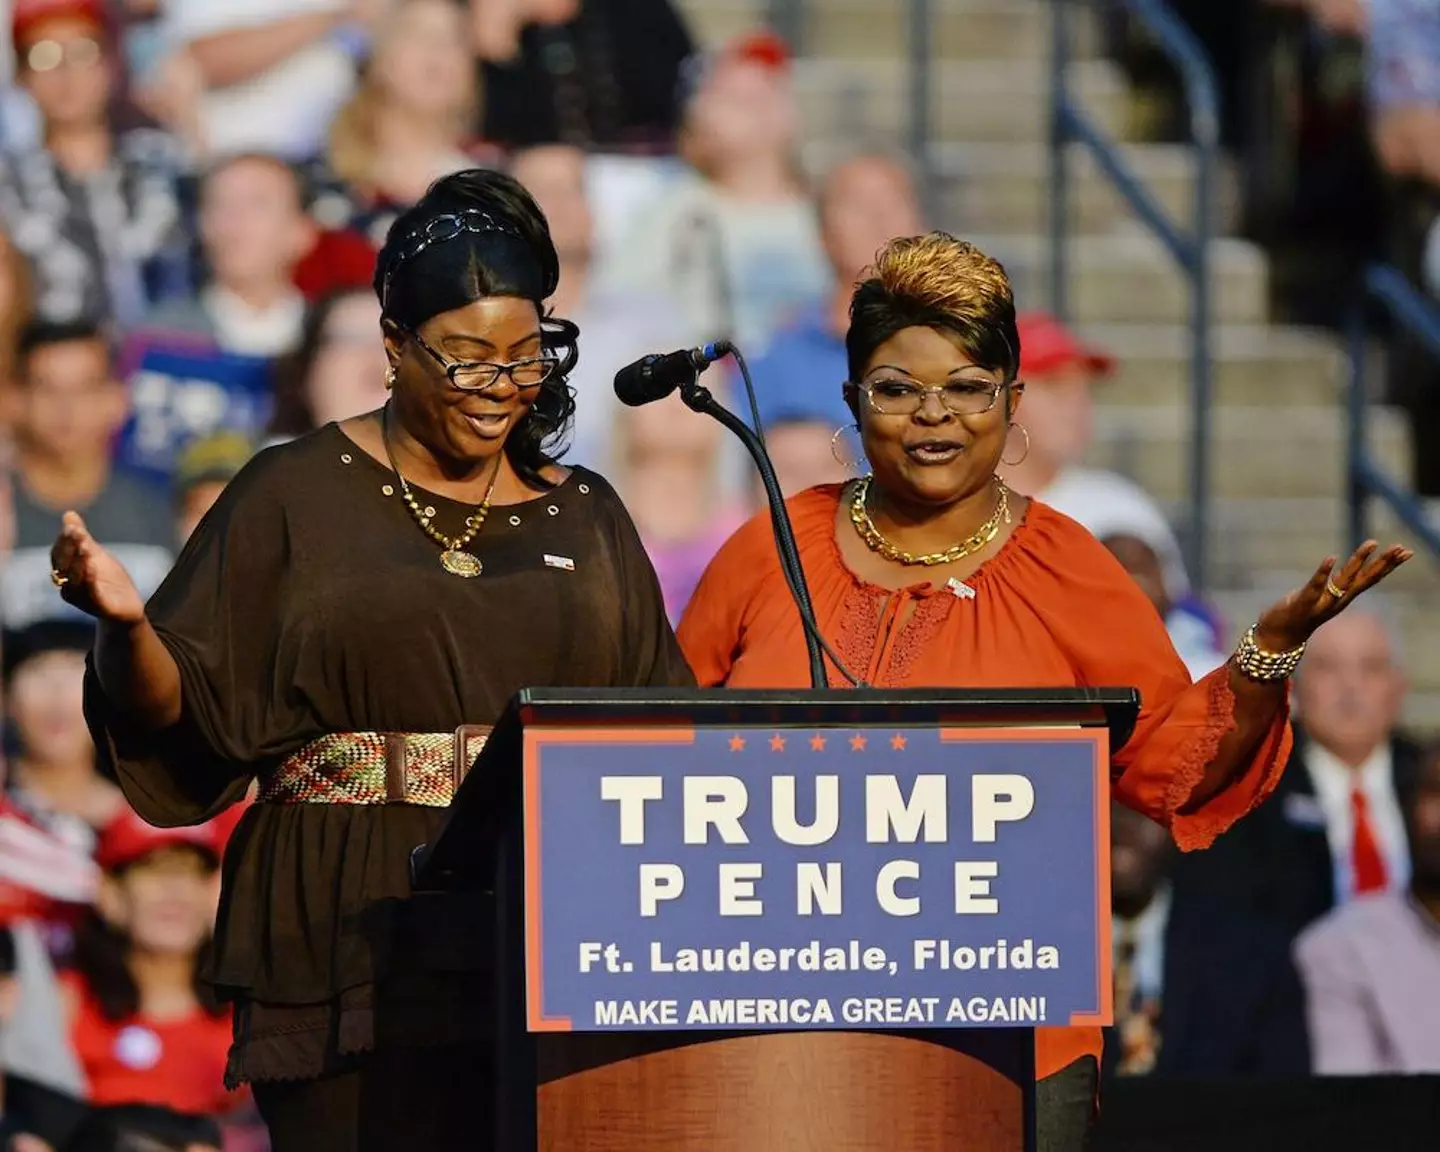 Diamond and Silk were known for their support of Trump.